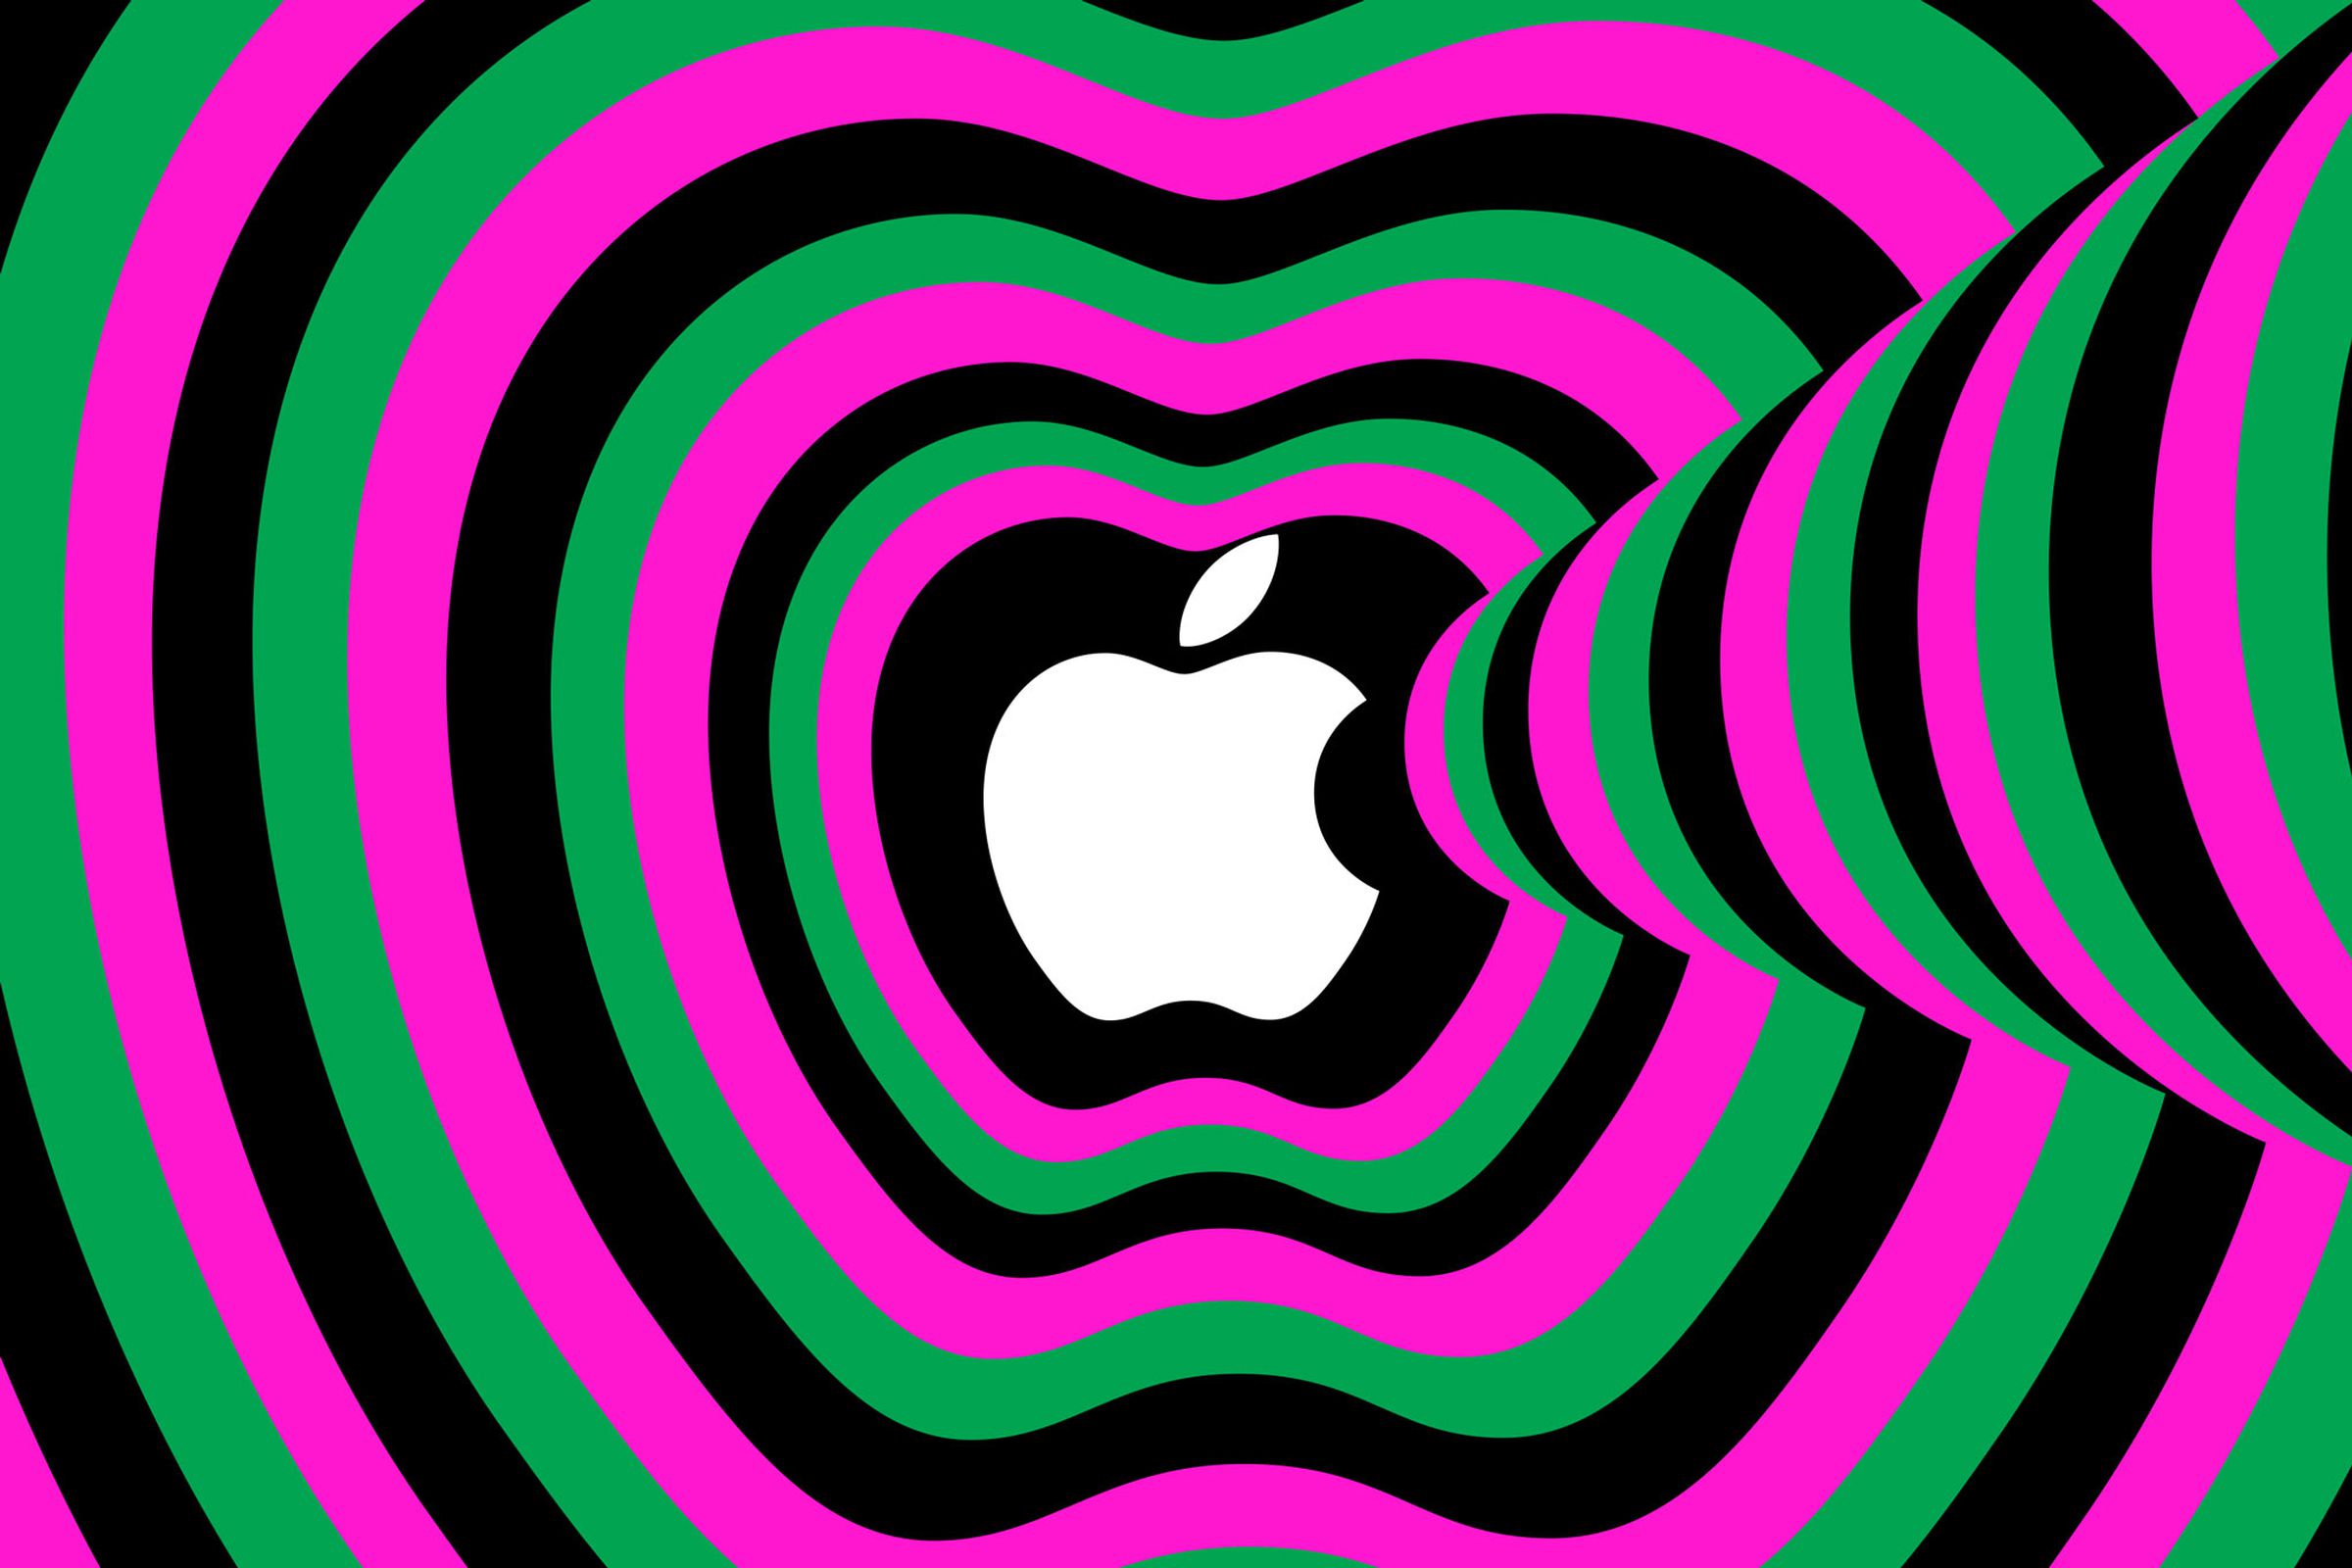 Image of the Apple logo surrounded by gray, pink, and green outlines